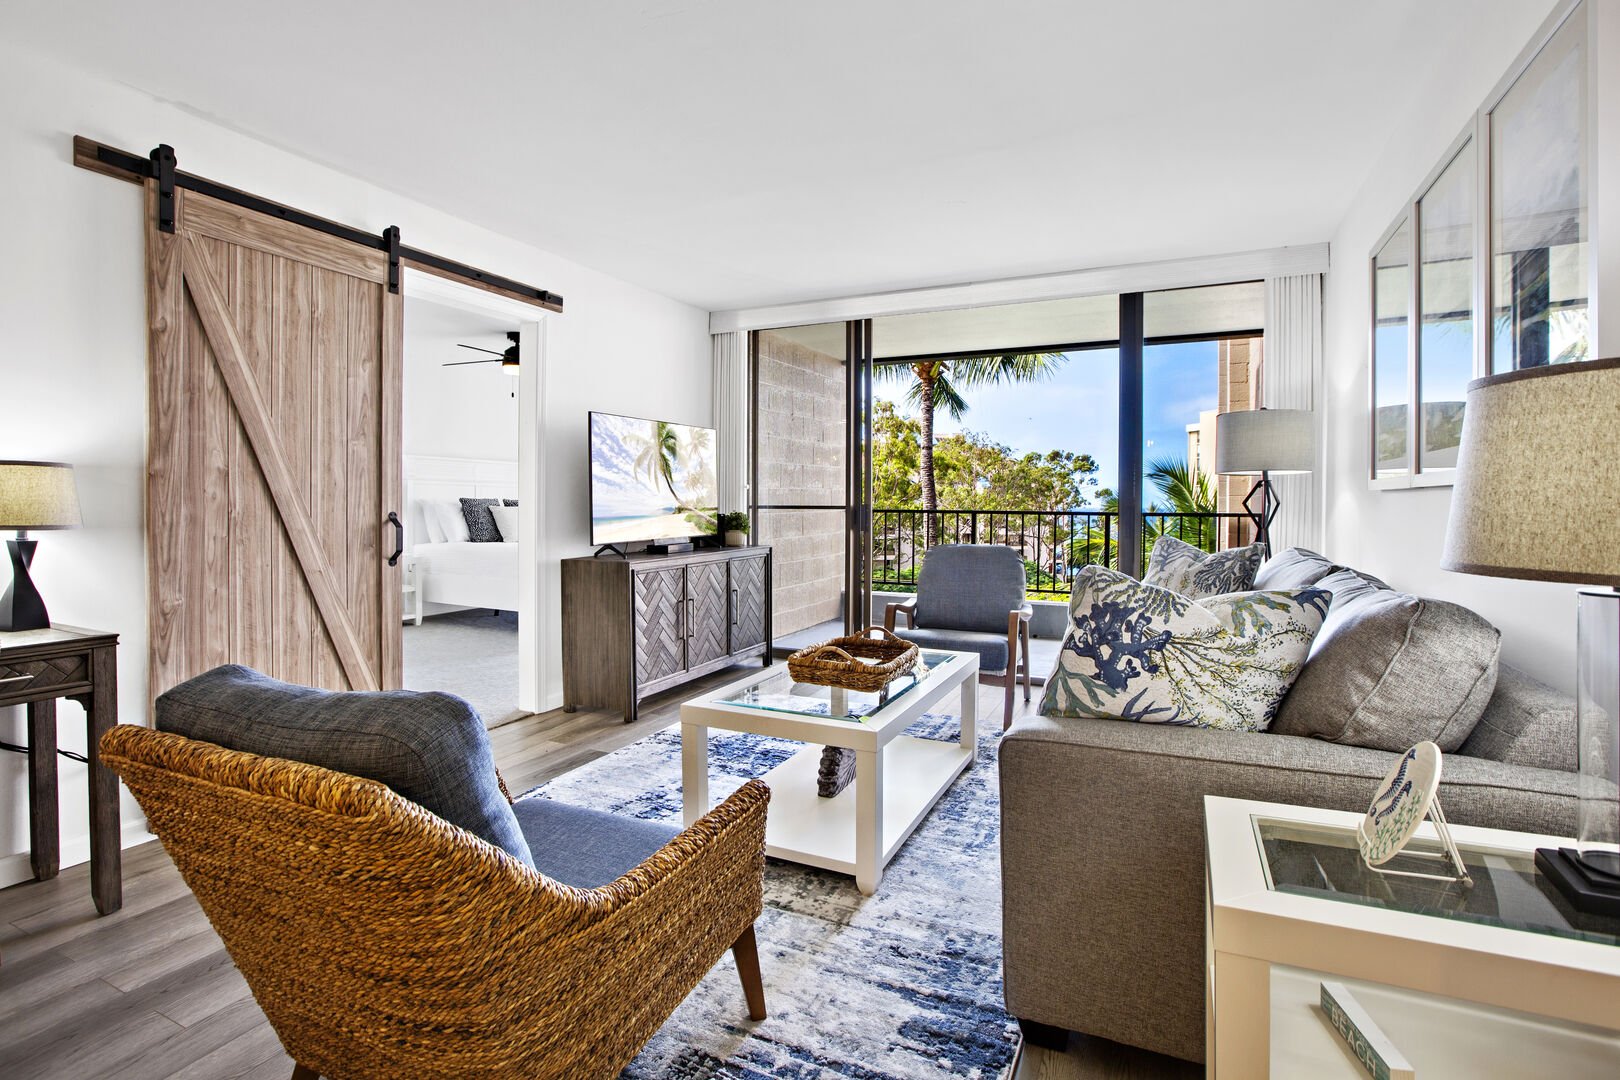 The inside of our Kahana Manor rentals